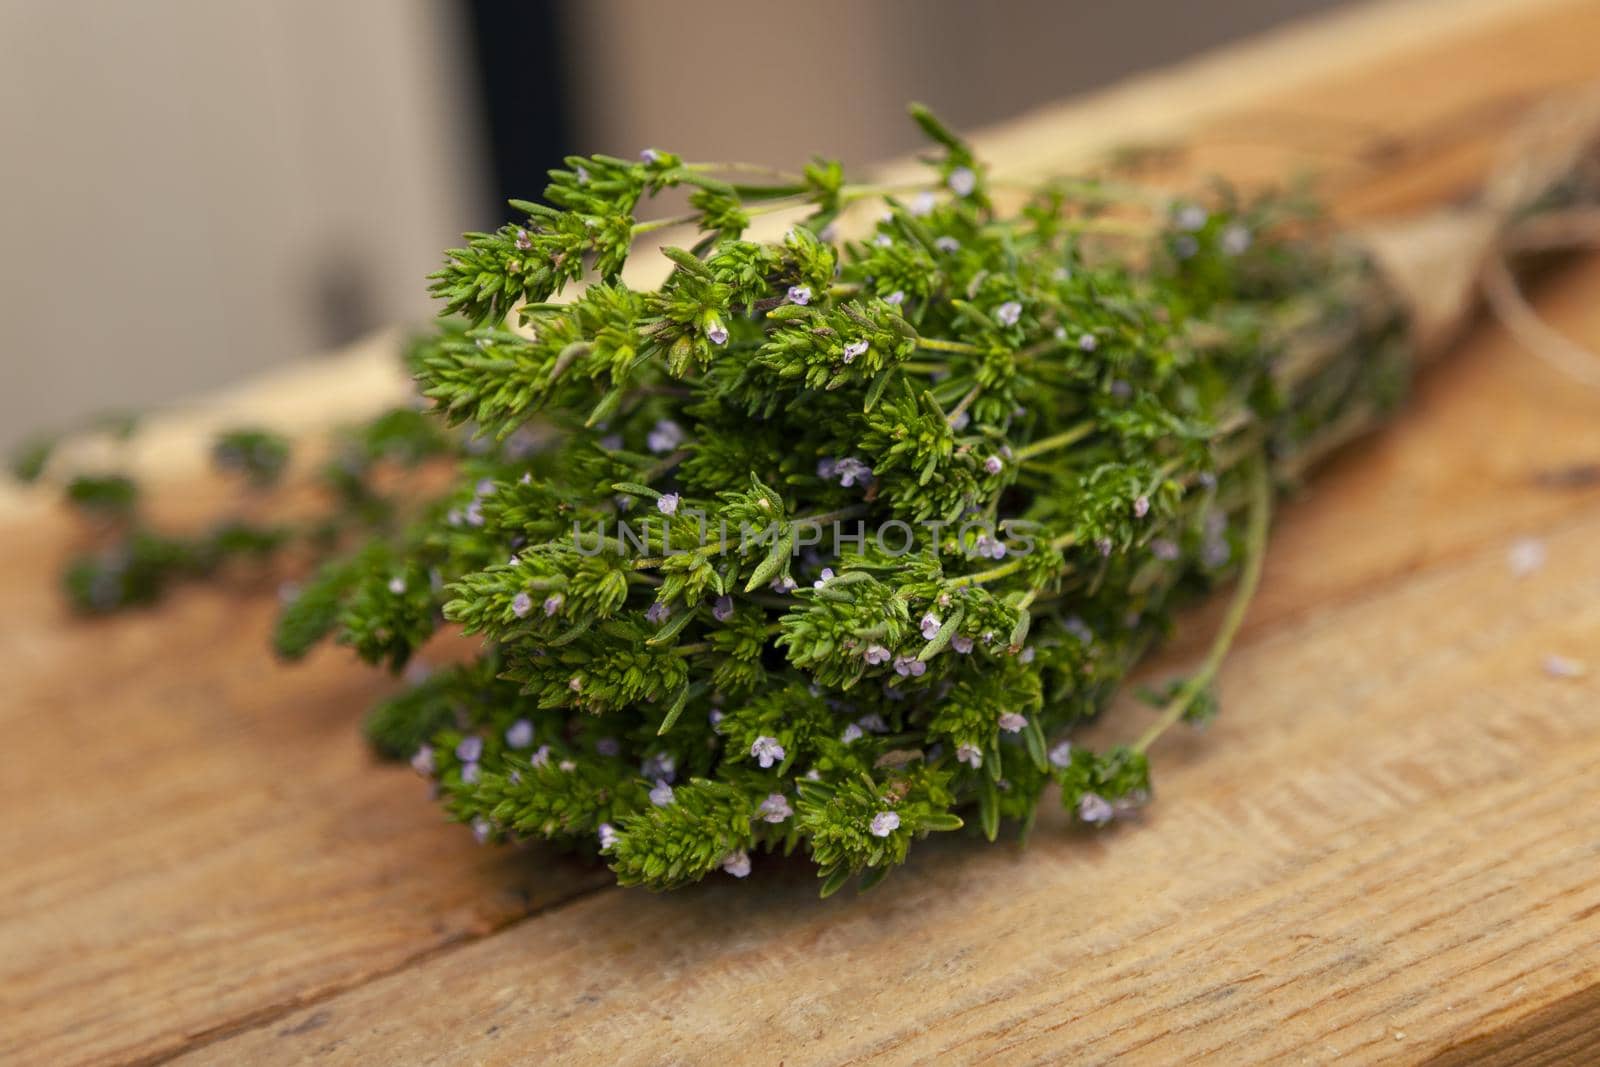 Thyme Bush young juicy fresh Breckland wild thyme with lilac flowers and green leaves on a wooden table close-up. Blurred background environment